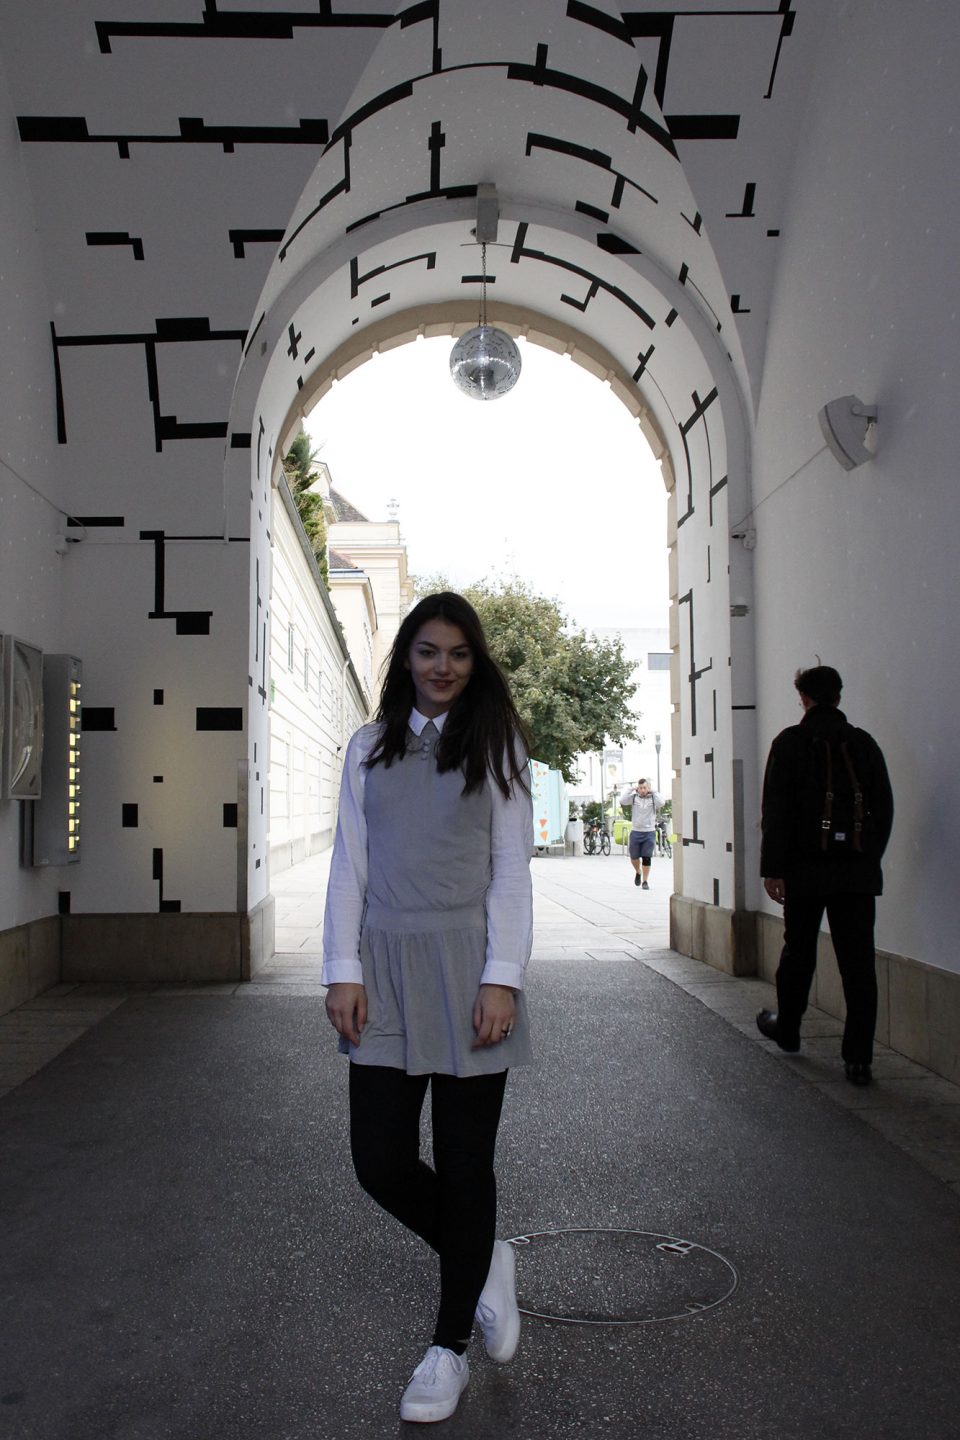 Dorie standing in a black white tunnel, waring a grey dress, a white blouse, black legging and white shoes